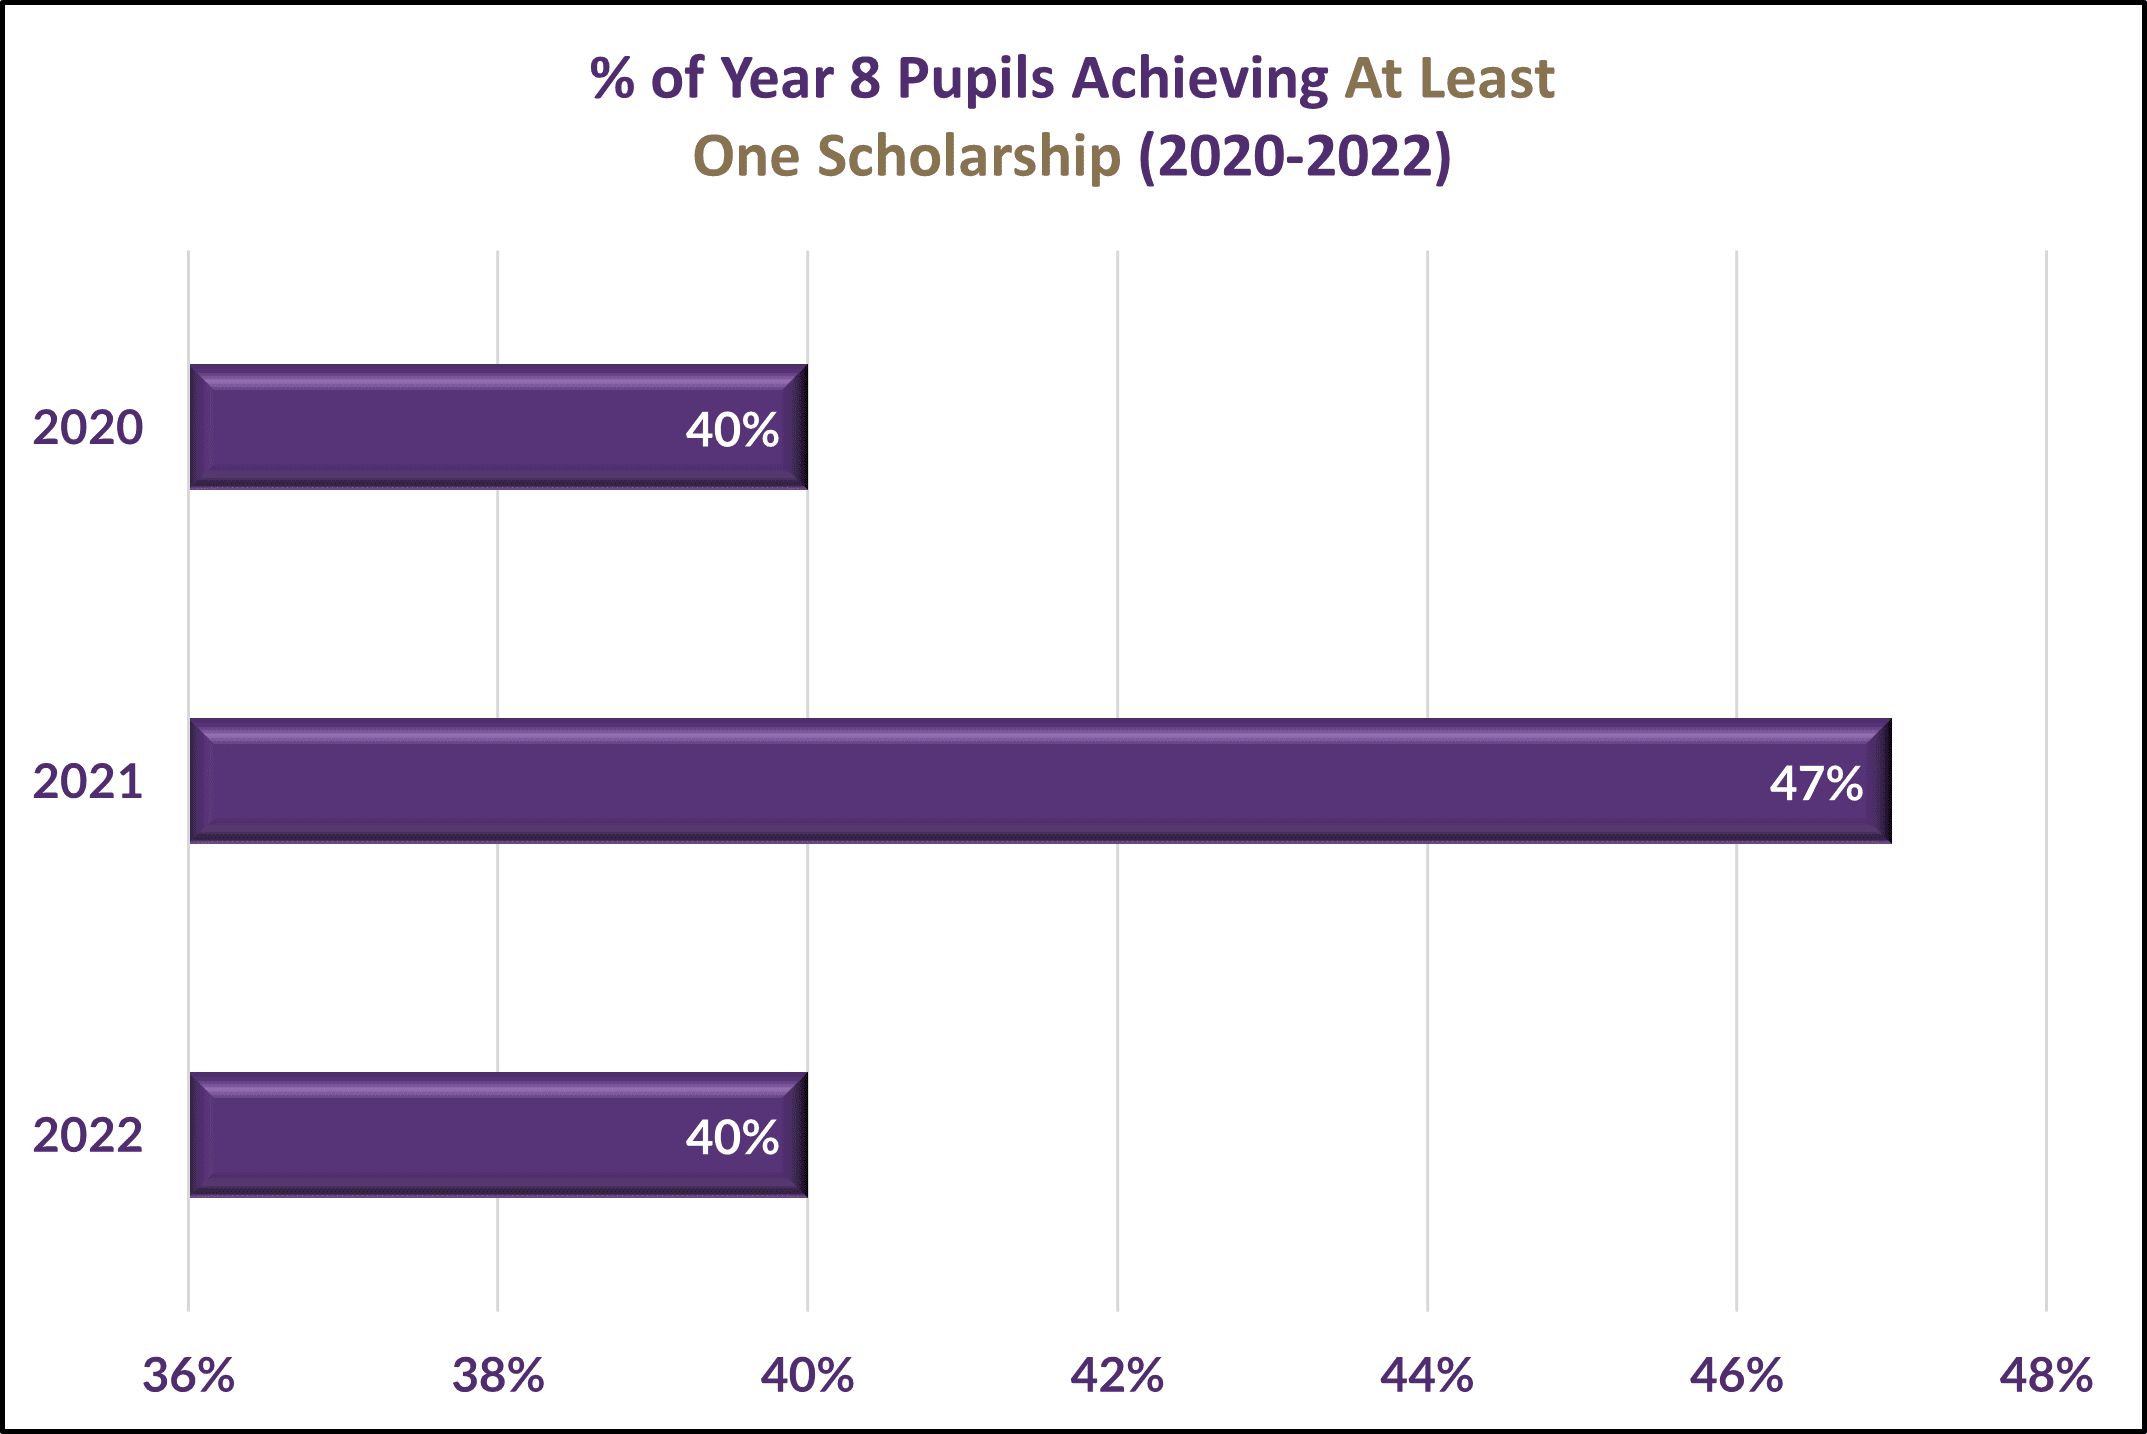 Percentaje of year 8 pupils achieving at least one scholarship (2020-2022)